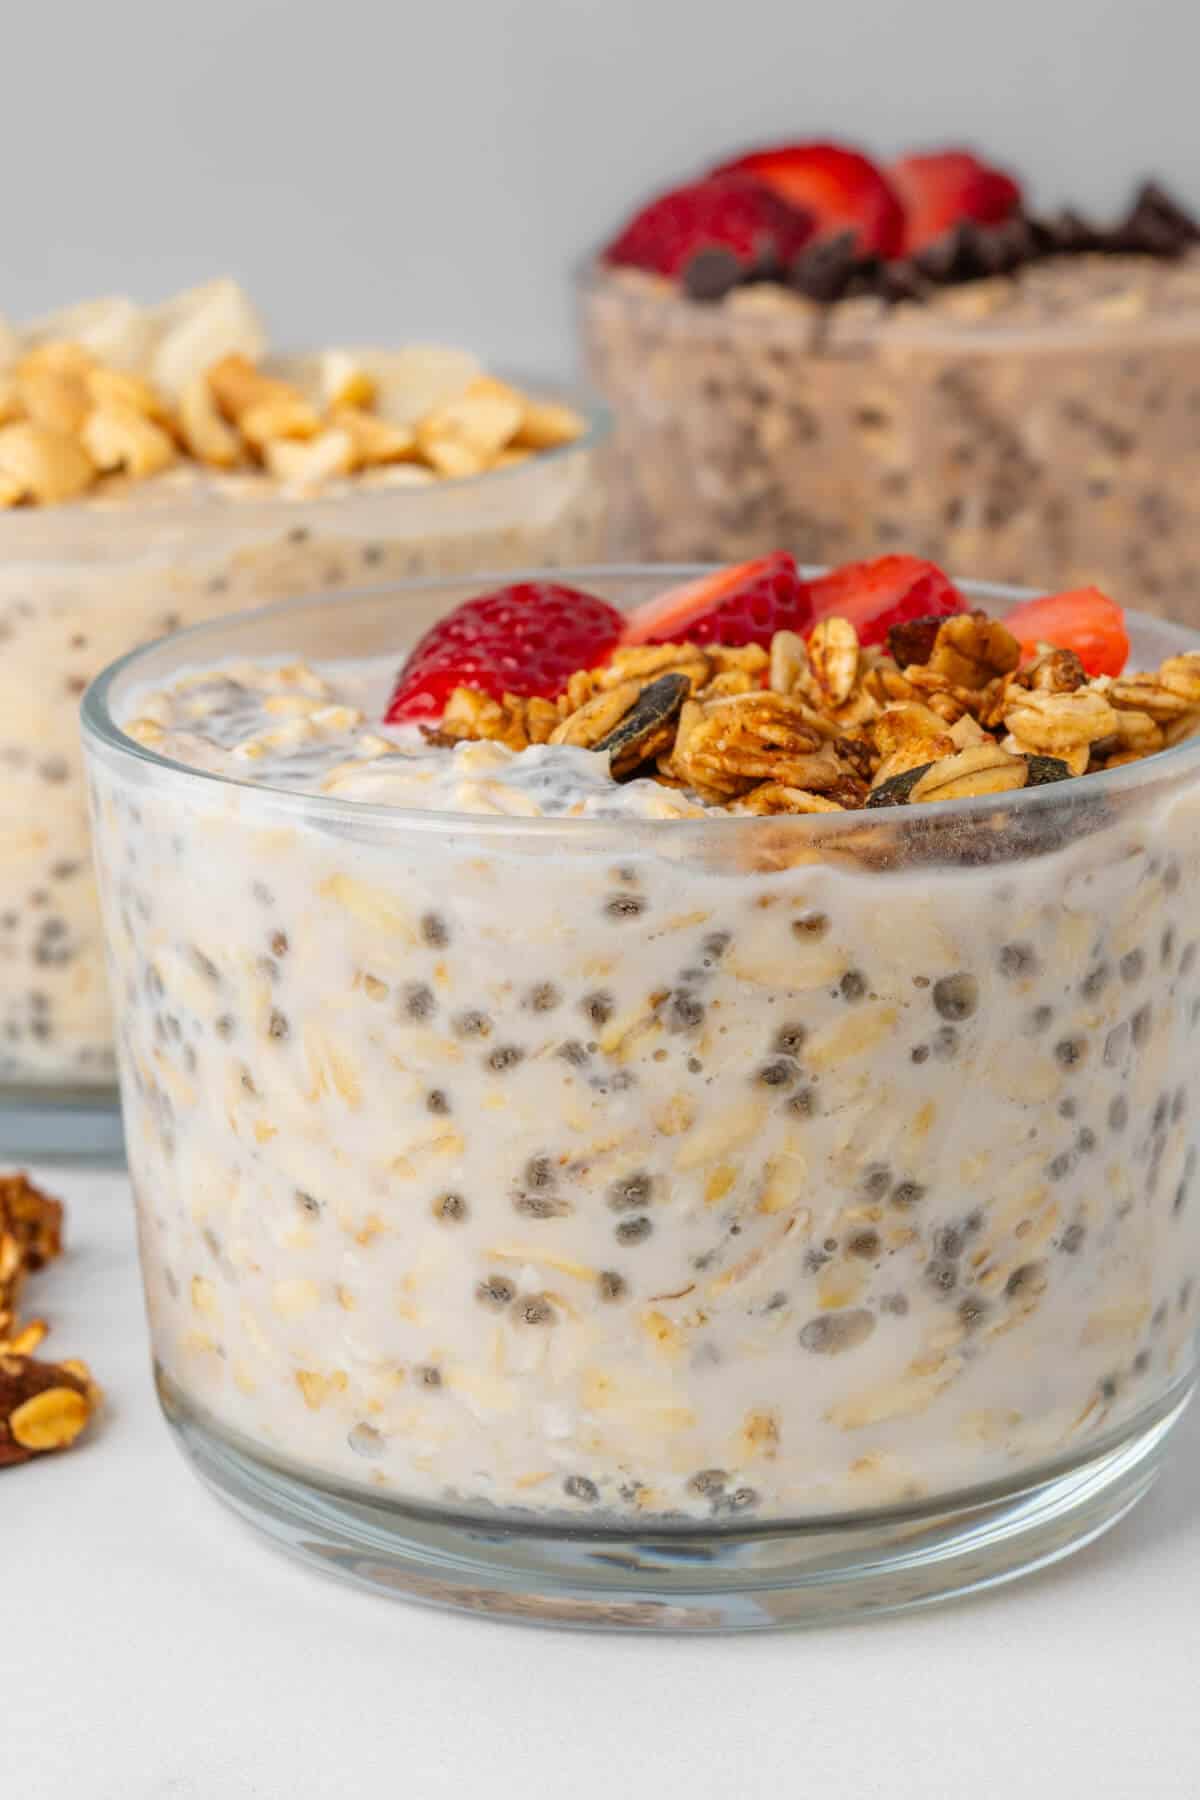 Close up to show texture of overnight oats